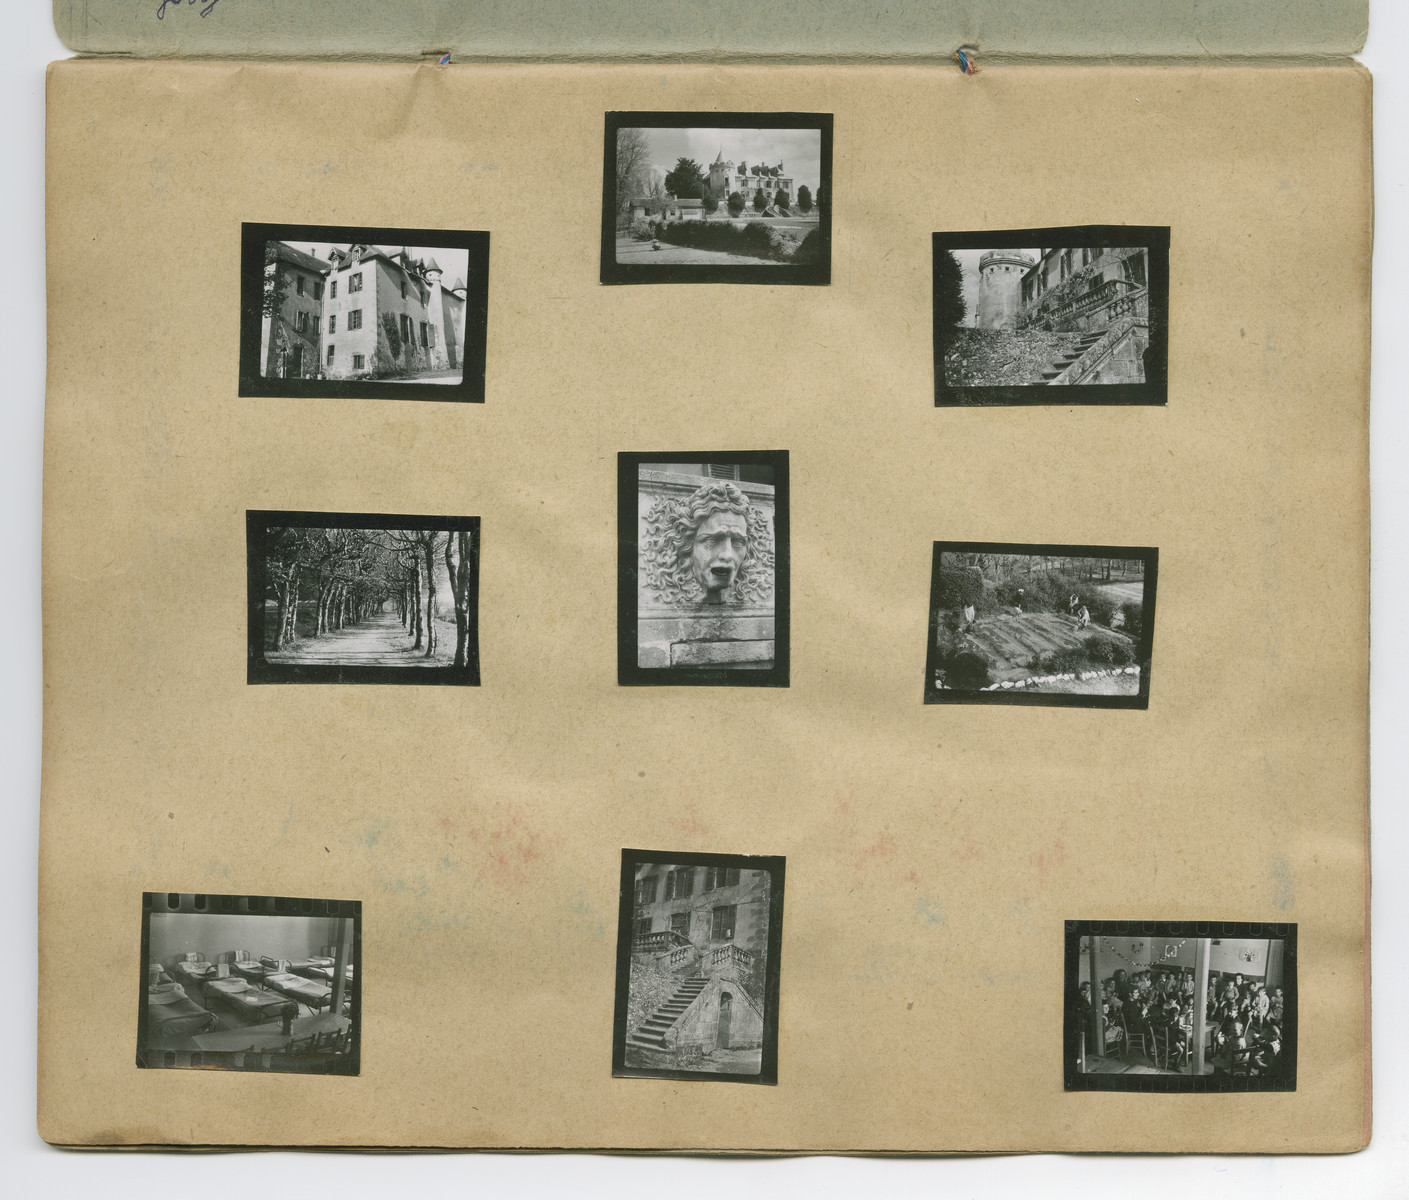 Photographs of Chateau-le-Masgelier from a souvenir scrapbook presented to Boris Wolosoff prior to his emigration from France.